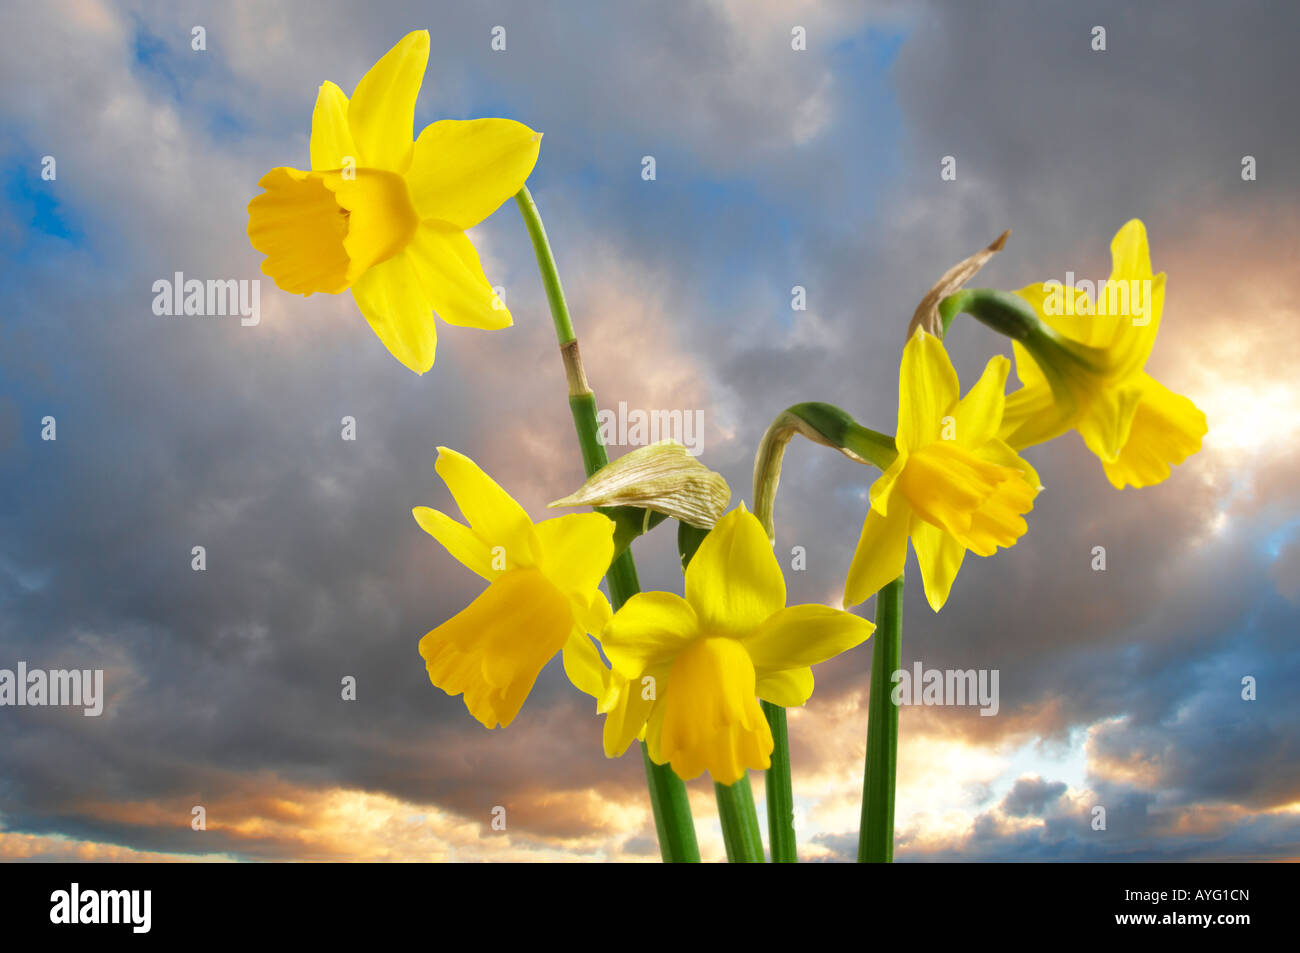 Daffodils against a sunset sky. Stock Photo